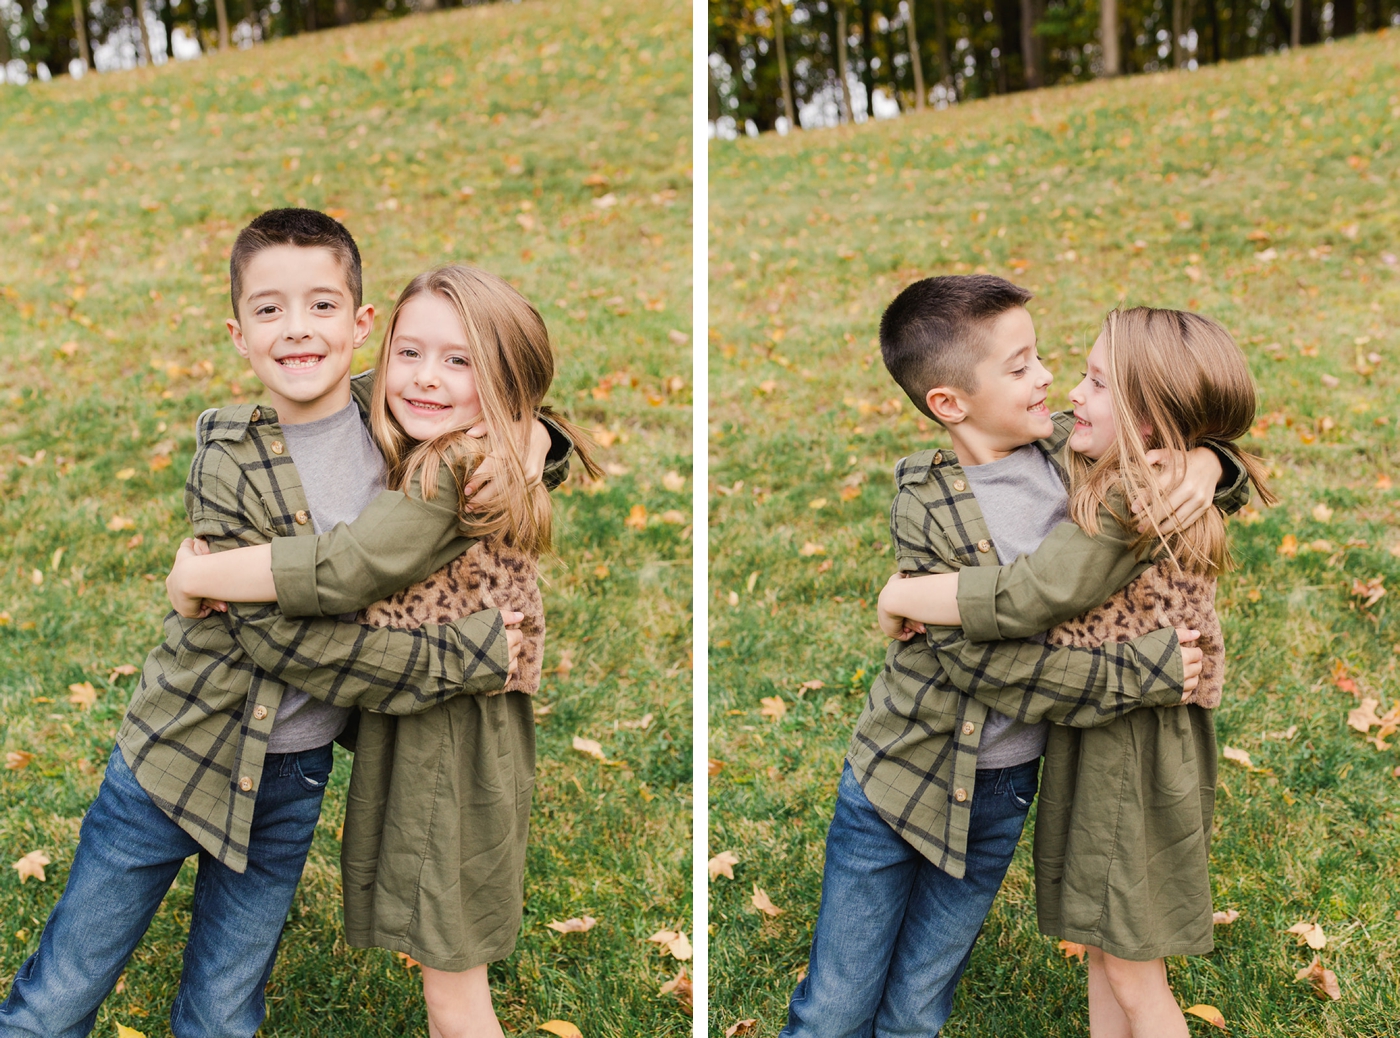 Fun and relaxed family photoshoot by Andrea Cooper Photography